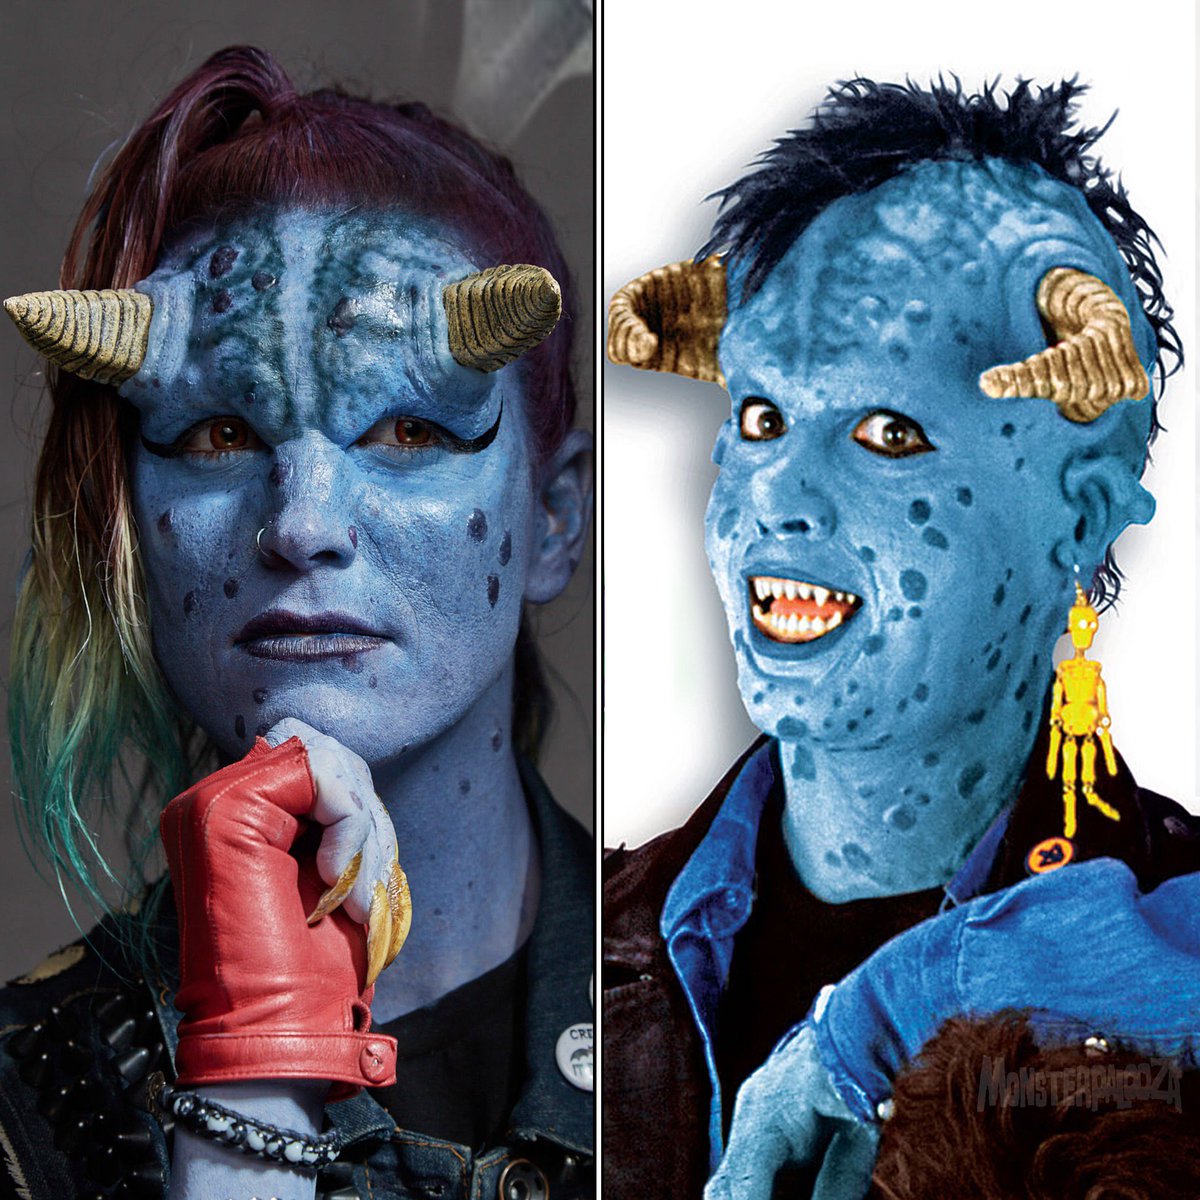 NAME THE MOVIE!
#Artists Nora Hewitt & Rachel Lynn Gervig put a twist on Maurice & created Maureen at the @melproducts booth at last months #Monsterpalooza!
*Modeled by: @KeaghlanAshley 
*Left photo by: Russell Brown & @seanteegarden @Adobe 
➨ MONSTERPALOOZA.COM